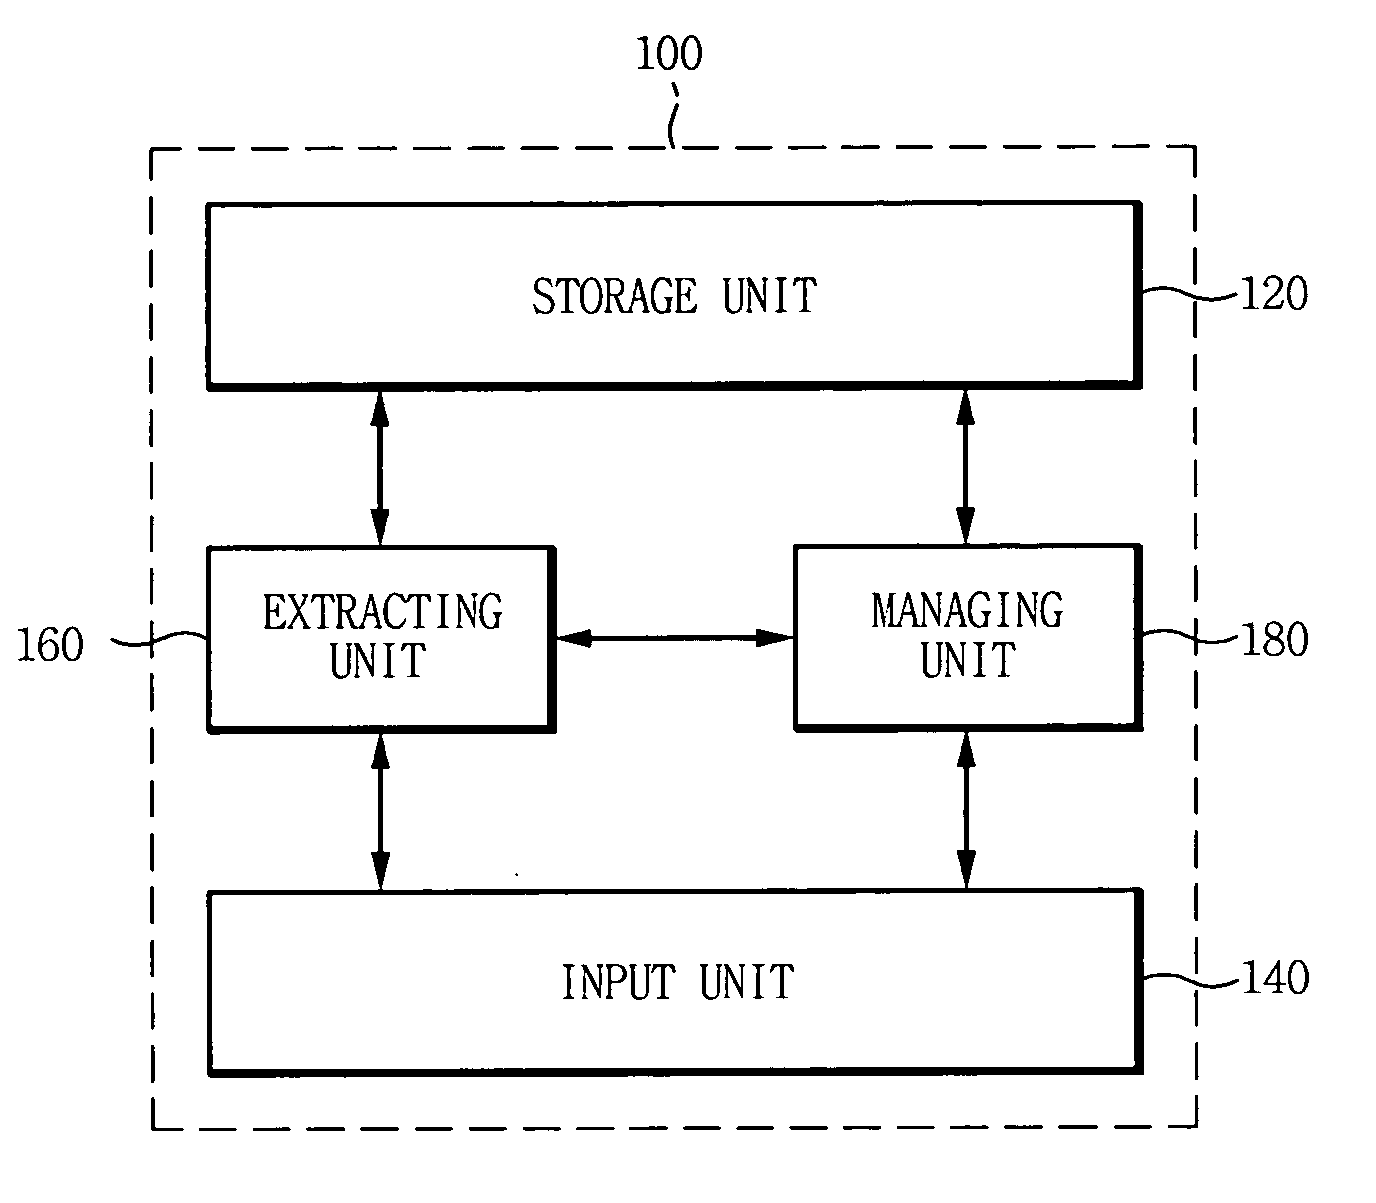 Apparatus and methods for integrated management of spatial/geographic contents